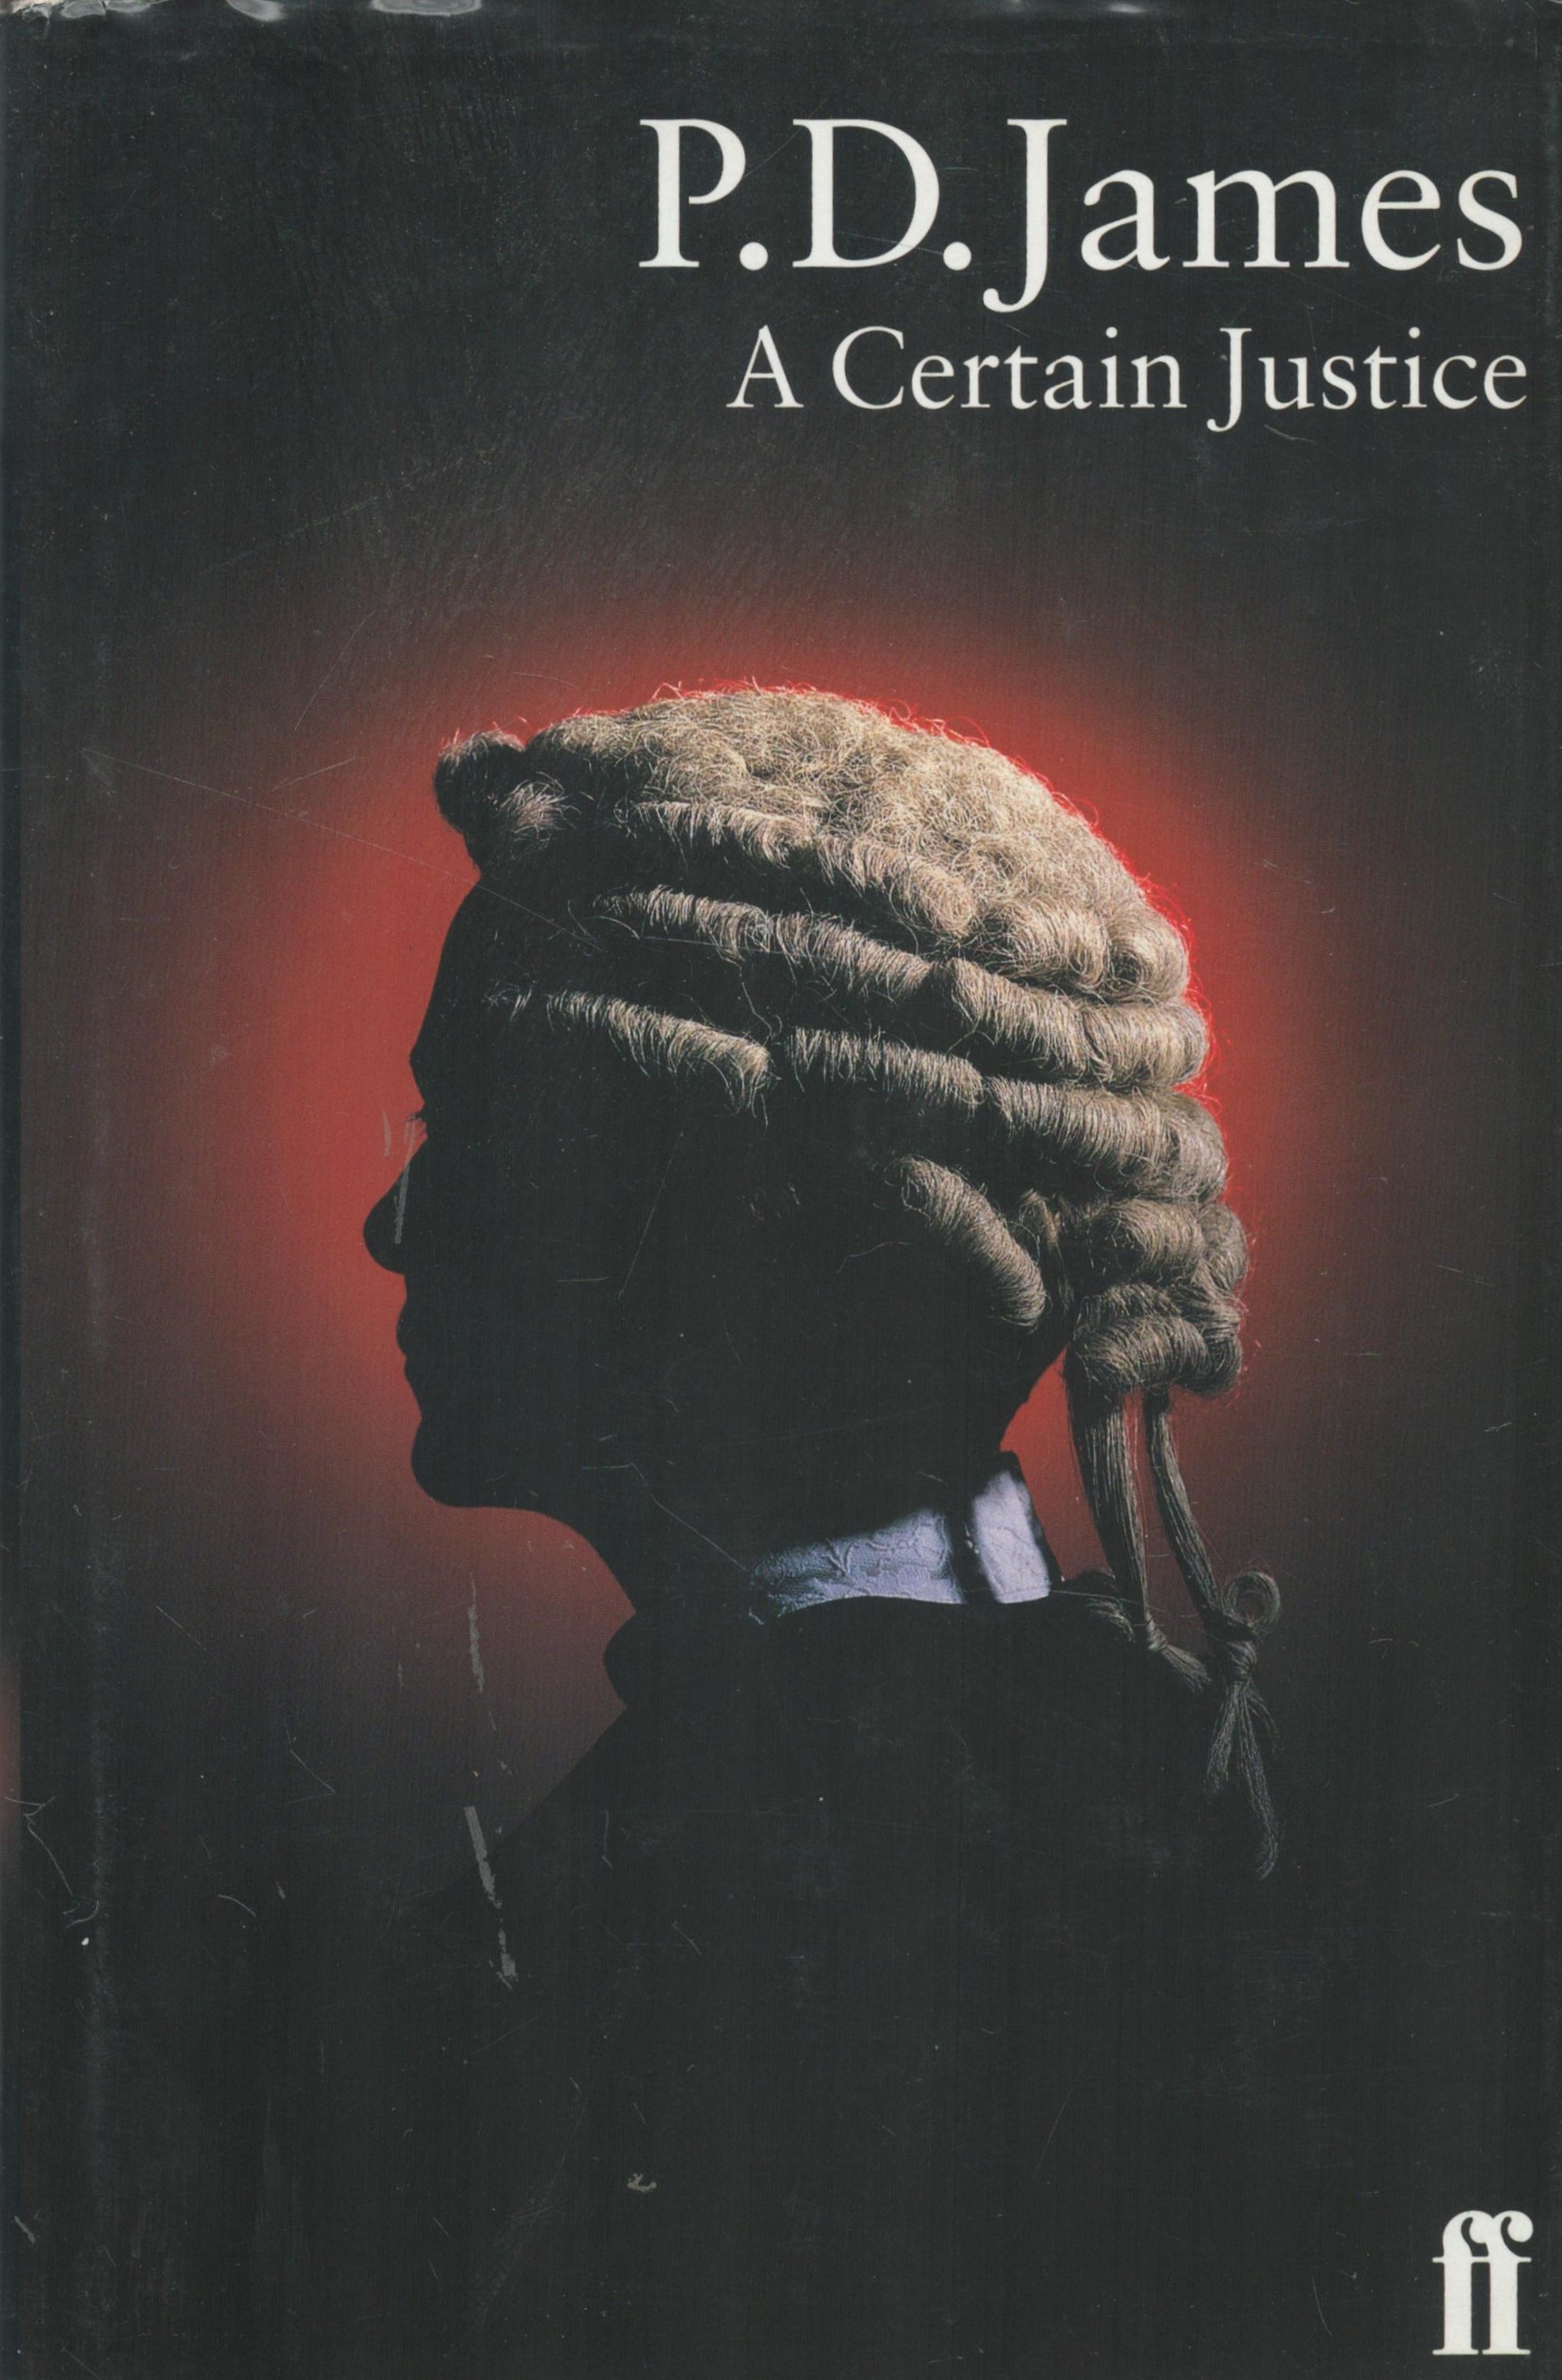 P. D. James A Certain Justice 1st Edition 1997 Book. We combine shipping on all lots. Single book £